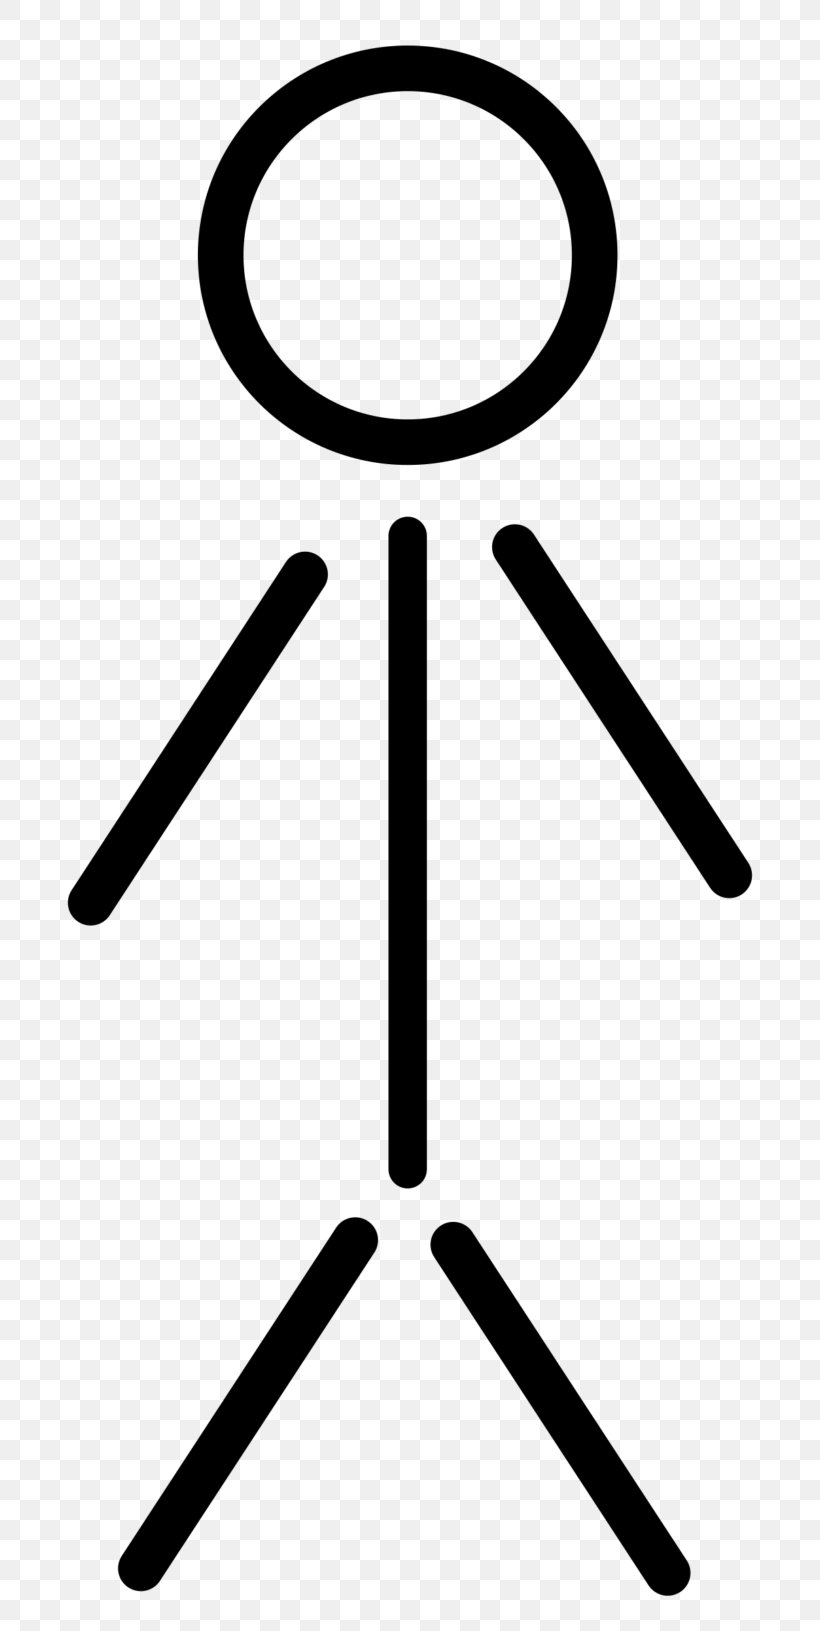 Stick Figure Clip Art, PNG, 768x1631px, Stick Figure, Art, Black And White, Drawing, Line Art Download Free